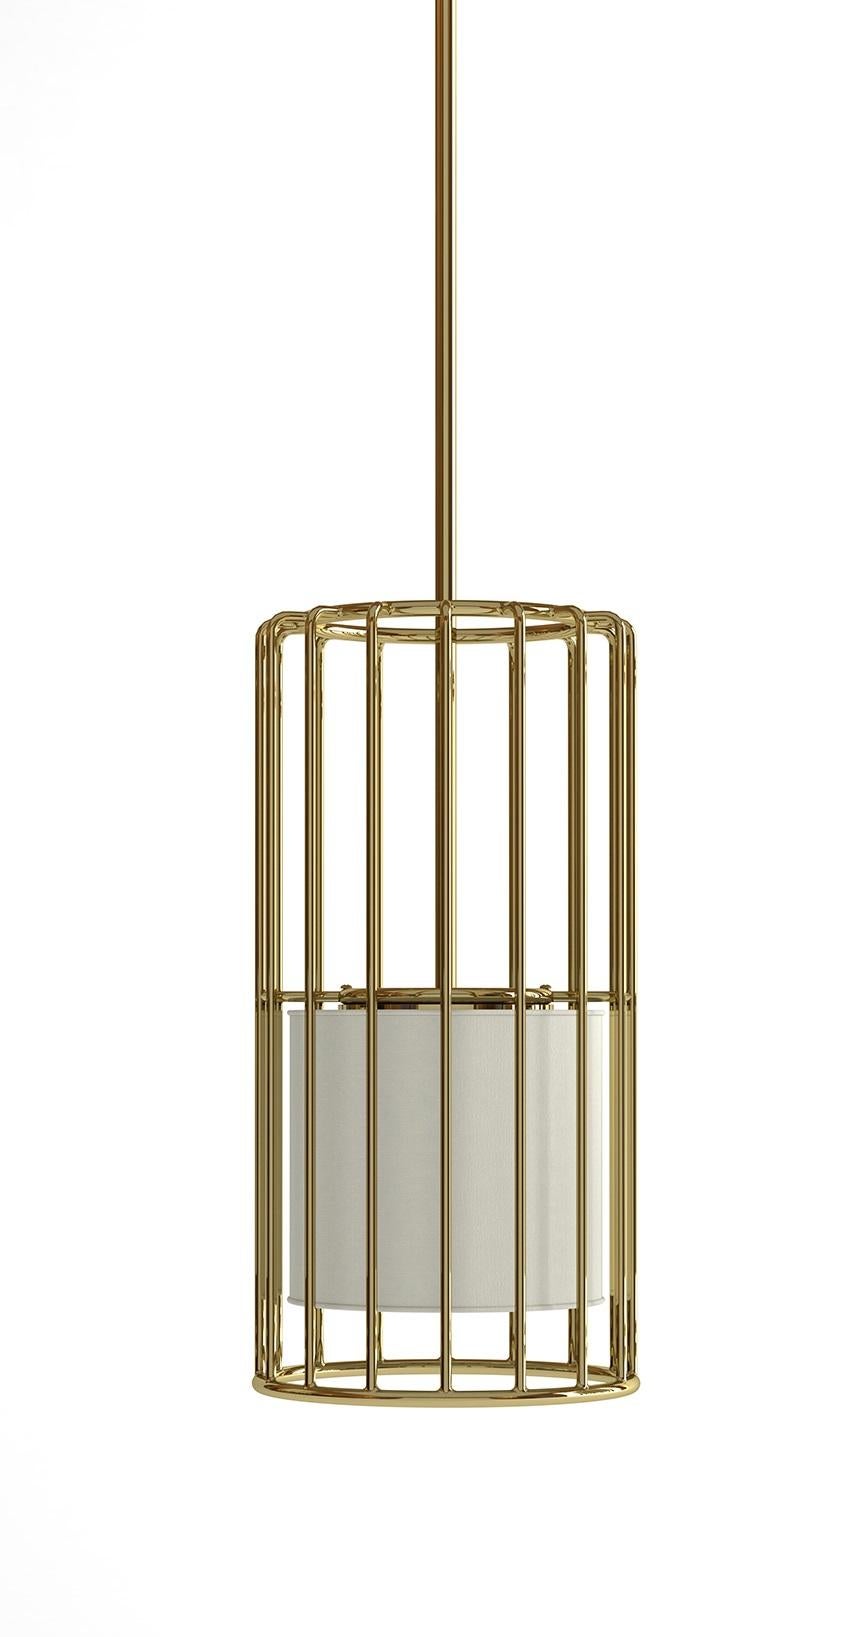 Inner Beauty Pendant Light by Phase Design
Dimensions: Ø 22.9 x H 45.7 cm. 
Materials: Linen and smoked brass.

Solid steel bar available in a smoked brass, polished chrome, burnt copper, gloss or flat black and white powder coat. Powder coat